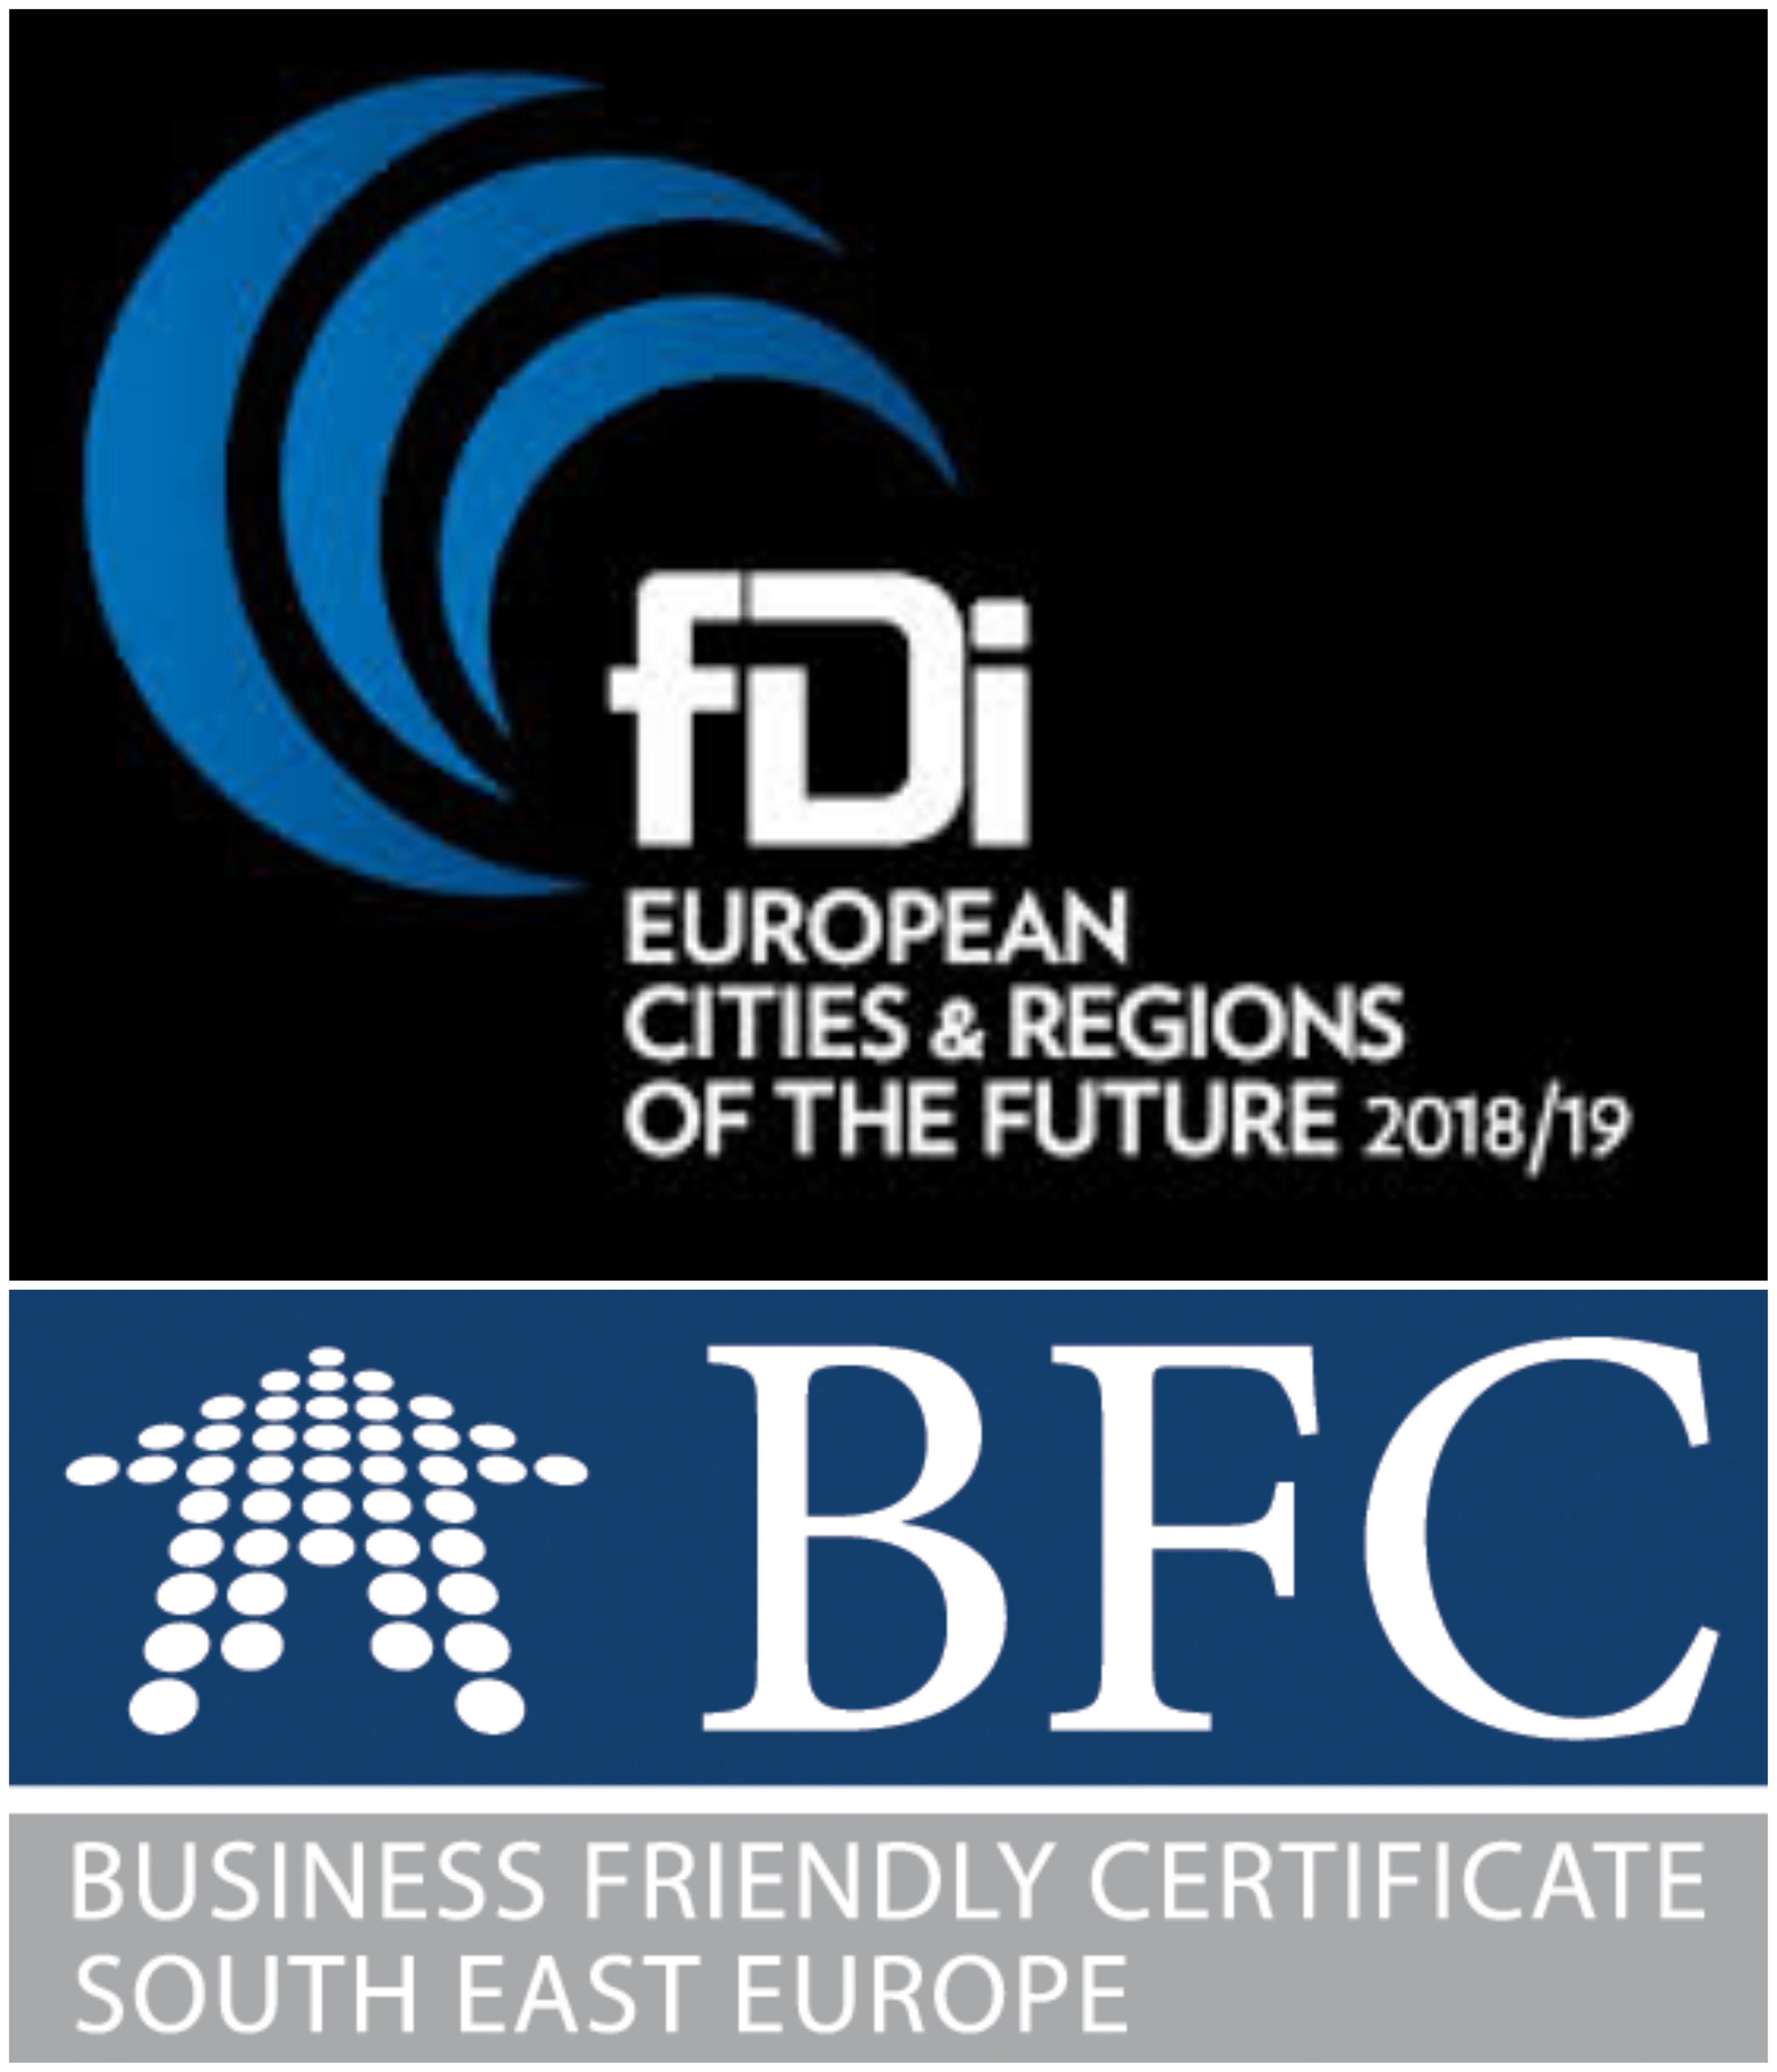 BFC SEE municipalites in fDi's European Cities and Regions of the Future 2018/19 report